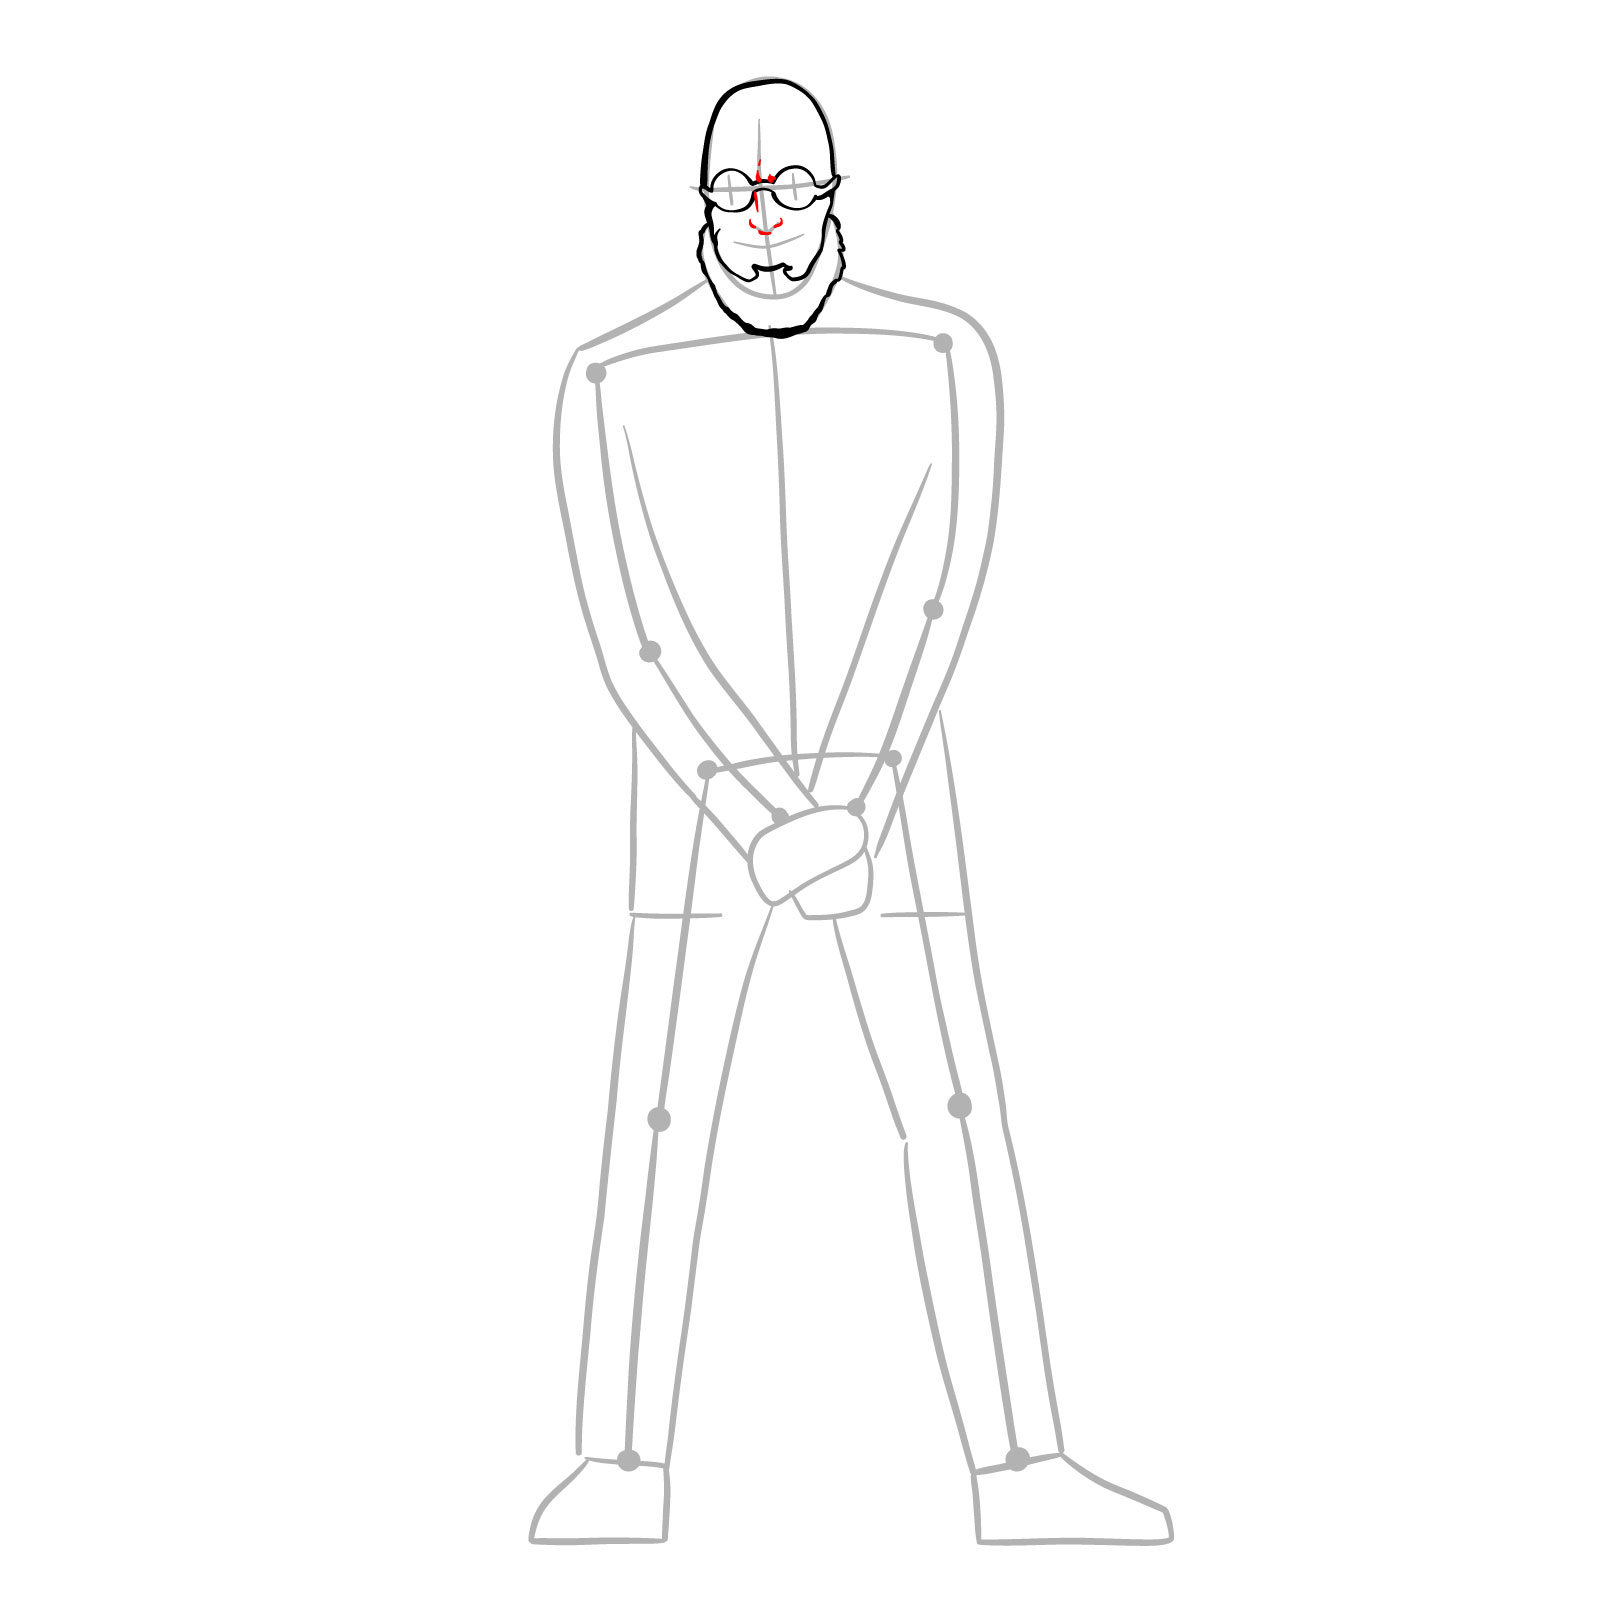 How to draw Dr. Hugo Strange from DC Comics - step 08